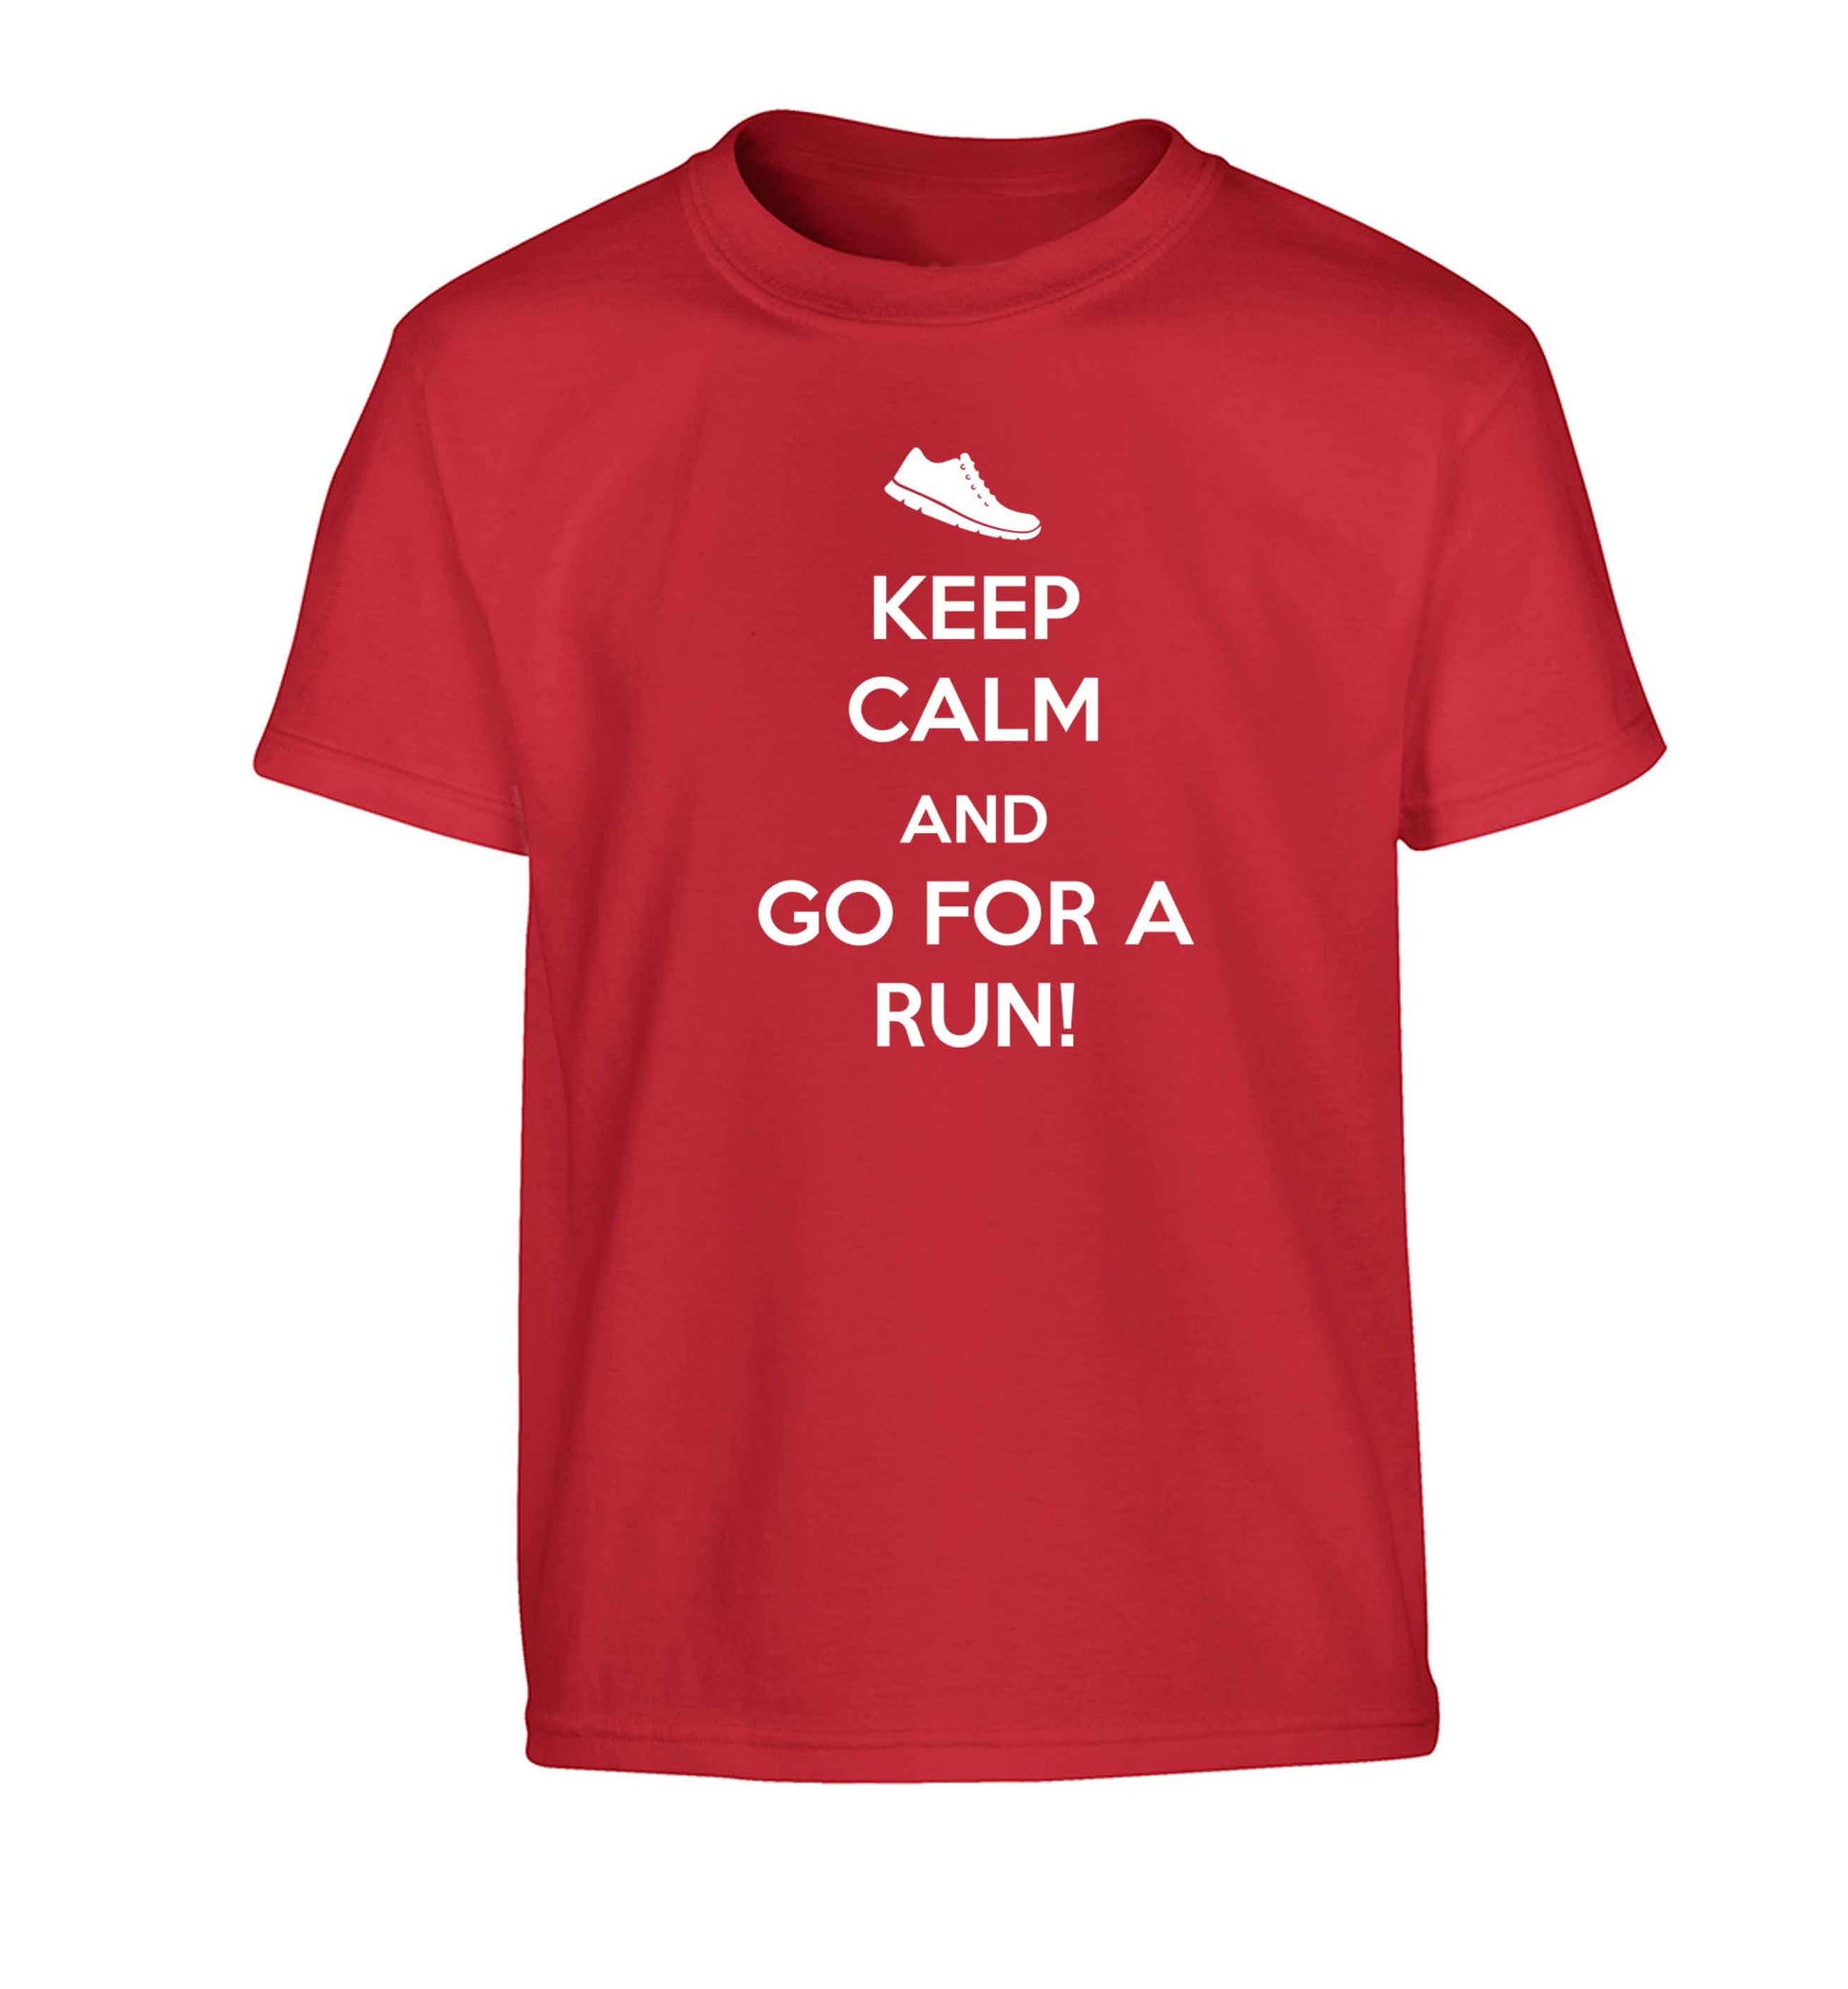 Keep calm and go for a run Children's red Tshirt 12-13 Years